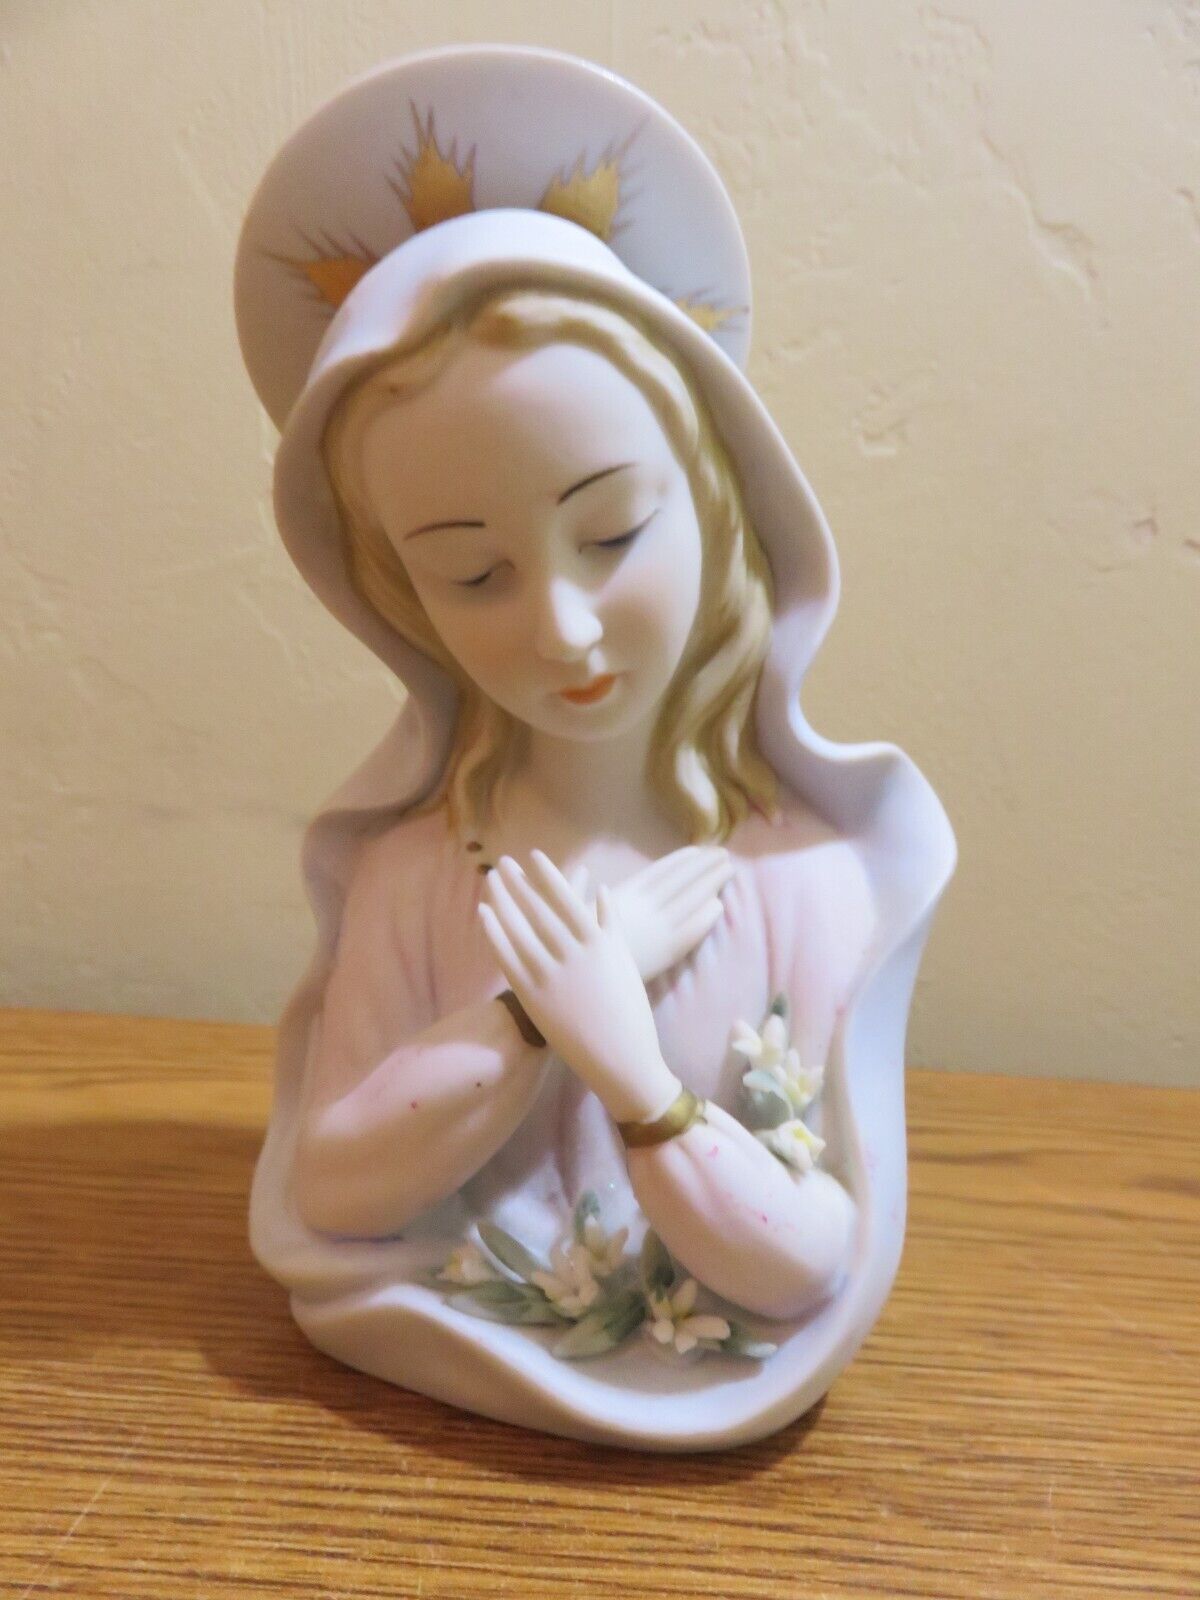 VINTGE LEFTON MADONNA VIRGIN MARY HAND-PAINTED FIGURINE 6 INCHES